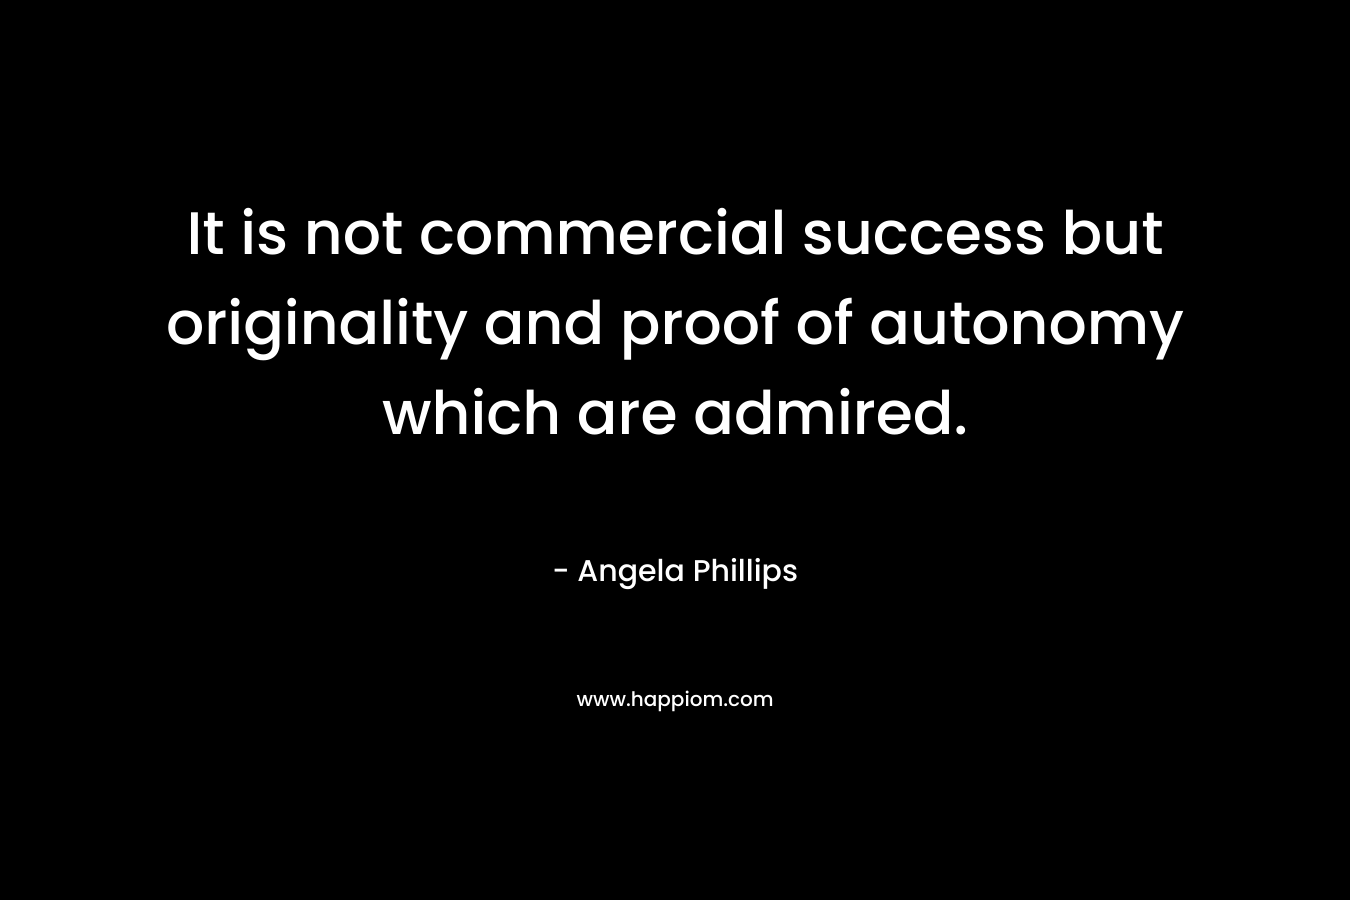 It is not commercial success but originality and proof of autonomy which are admired.